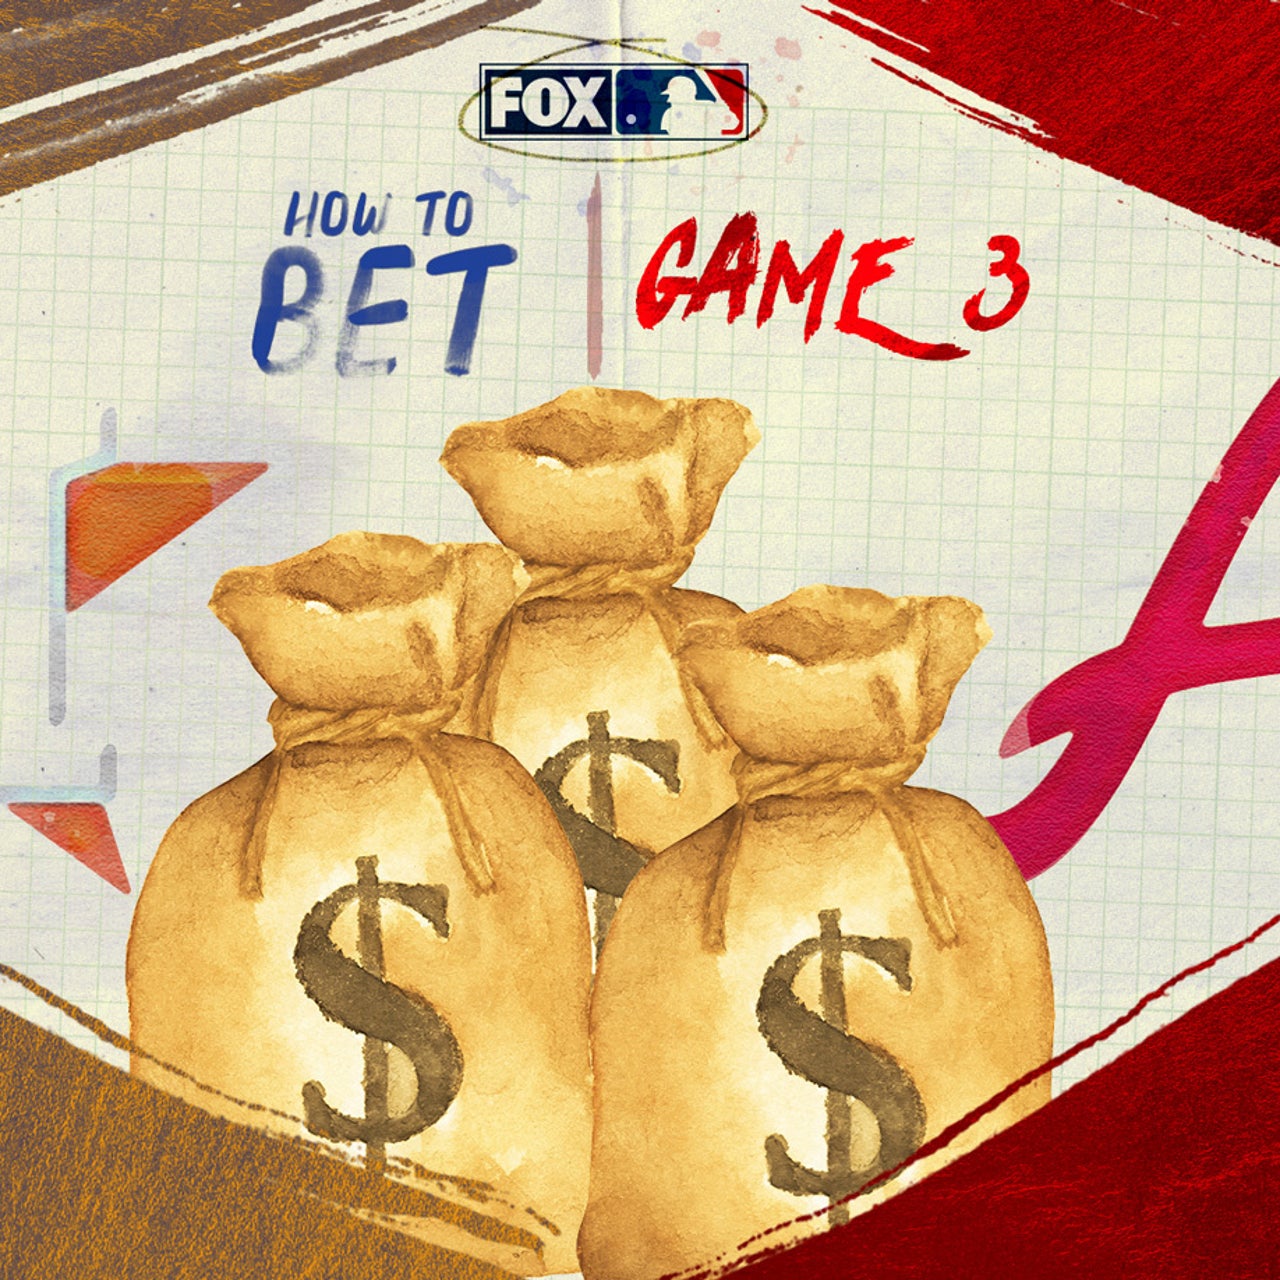 ALCS Game 6: Win $10,000 of Big Papi's money free with FOX Bet